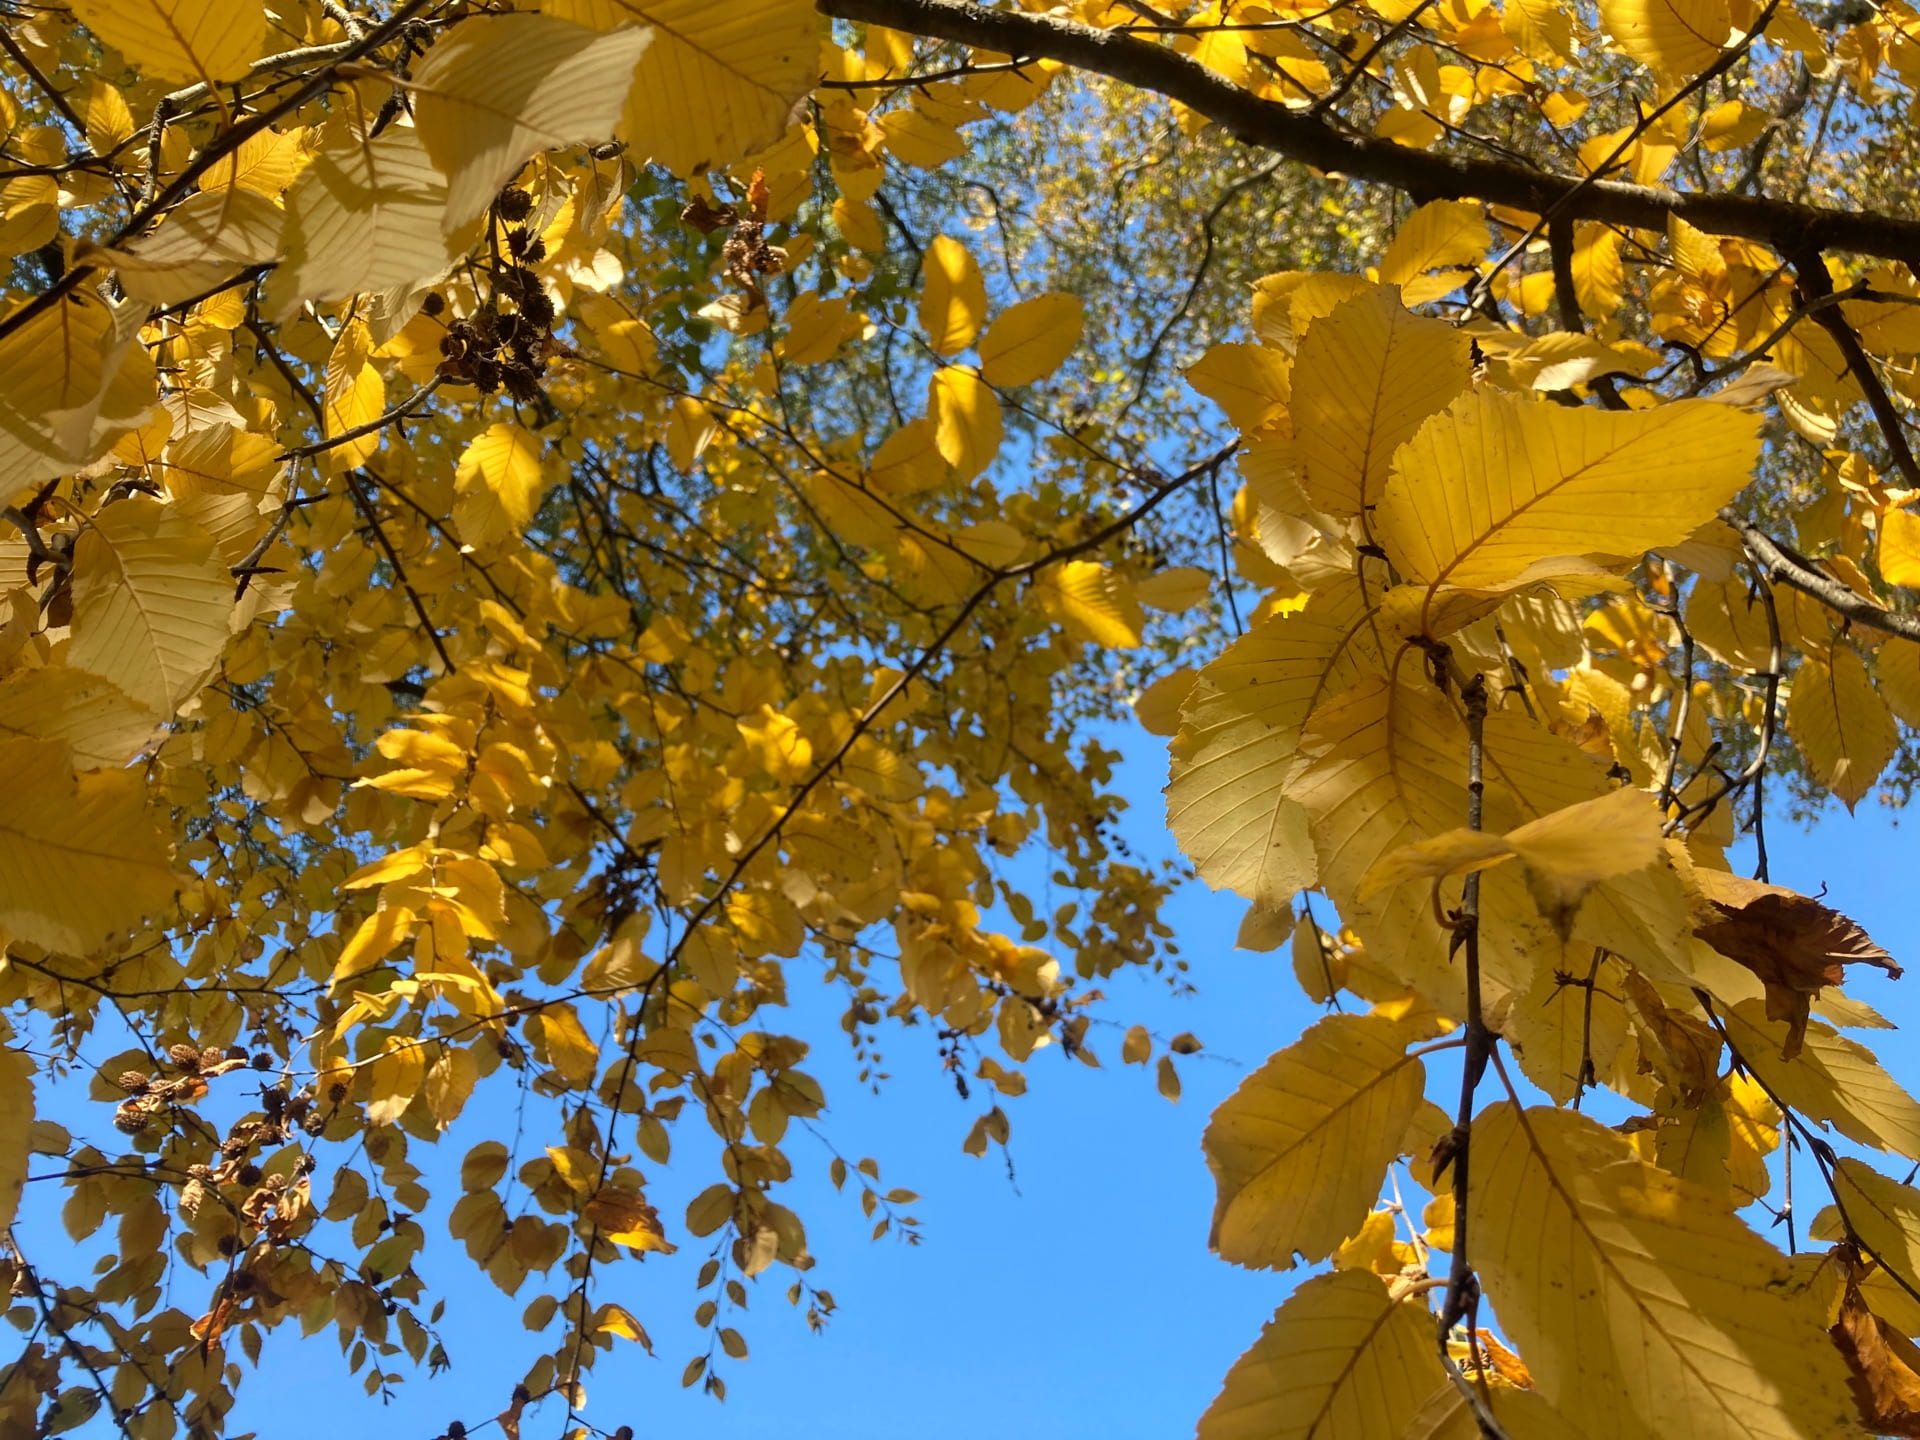 Yellow Betula lenta leaves contrast with the bright blue sky.